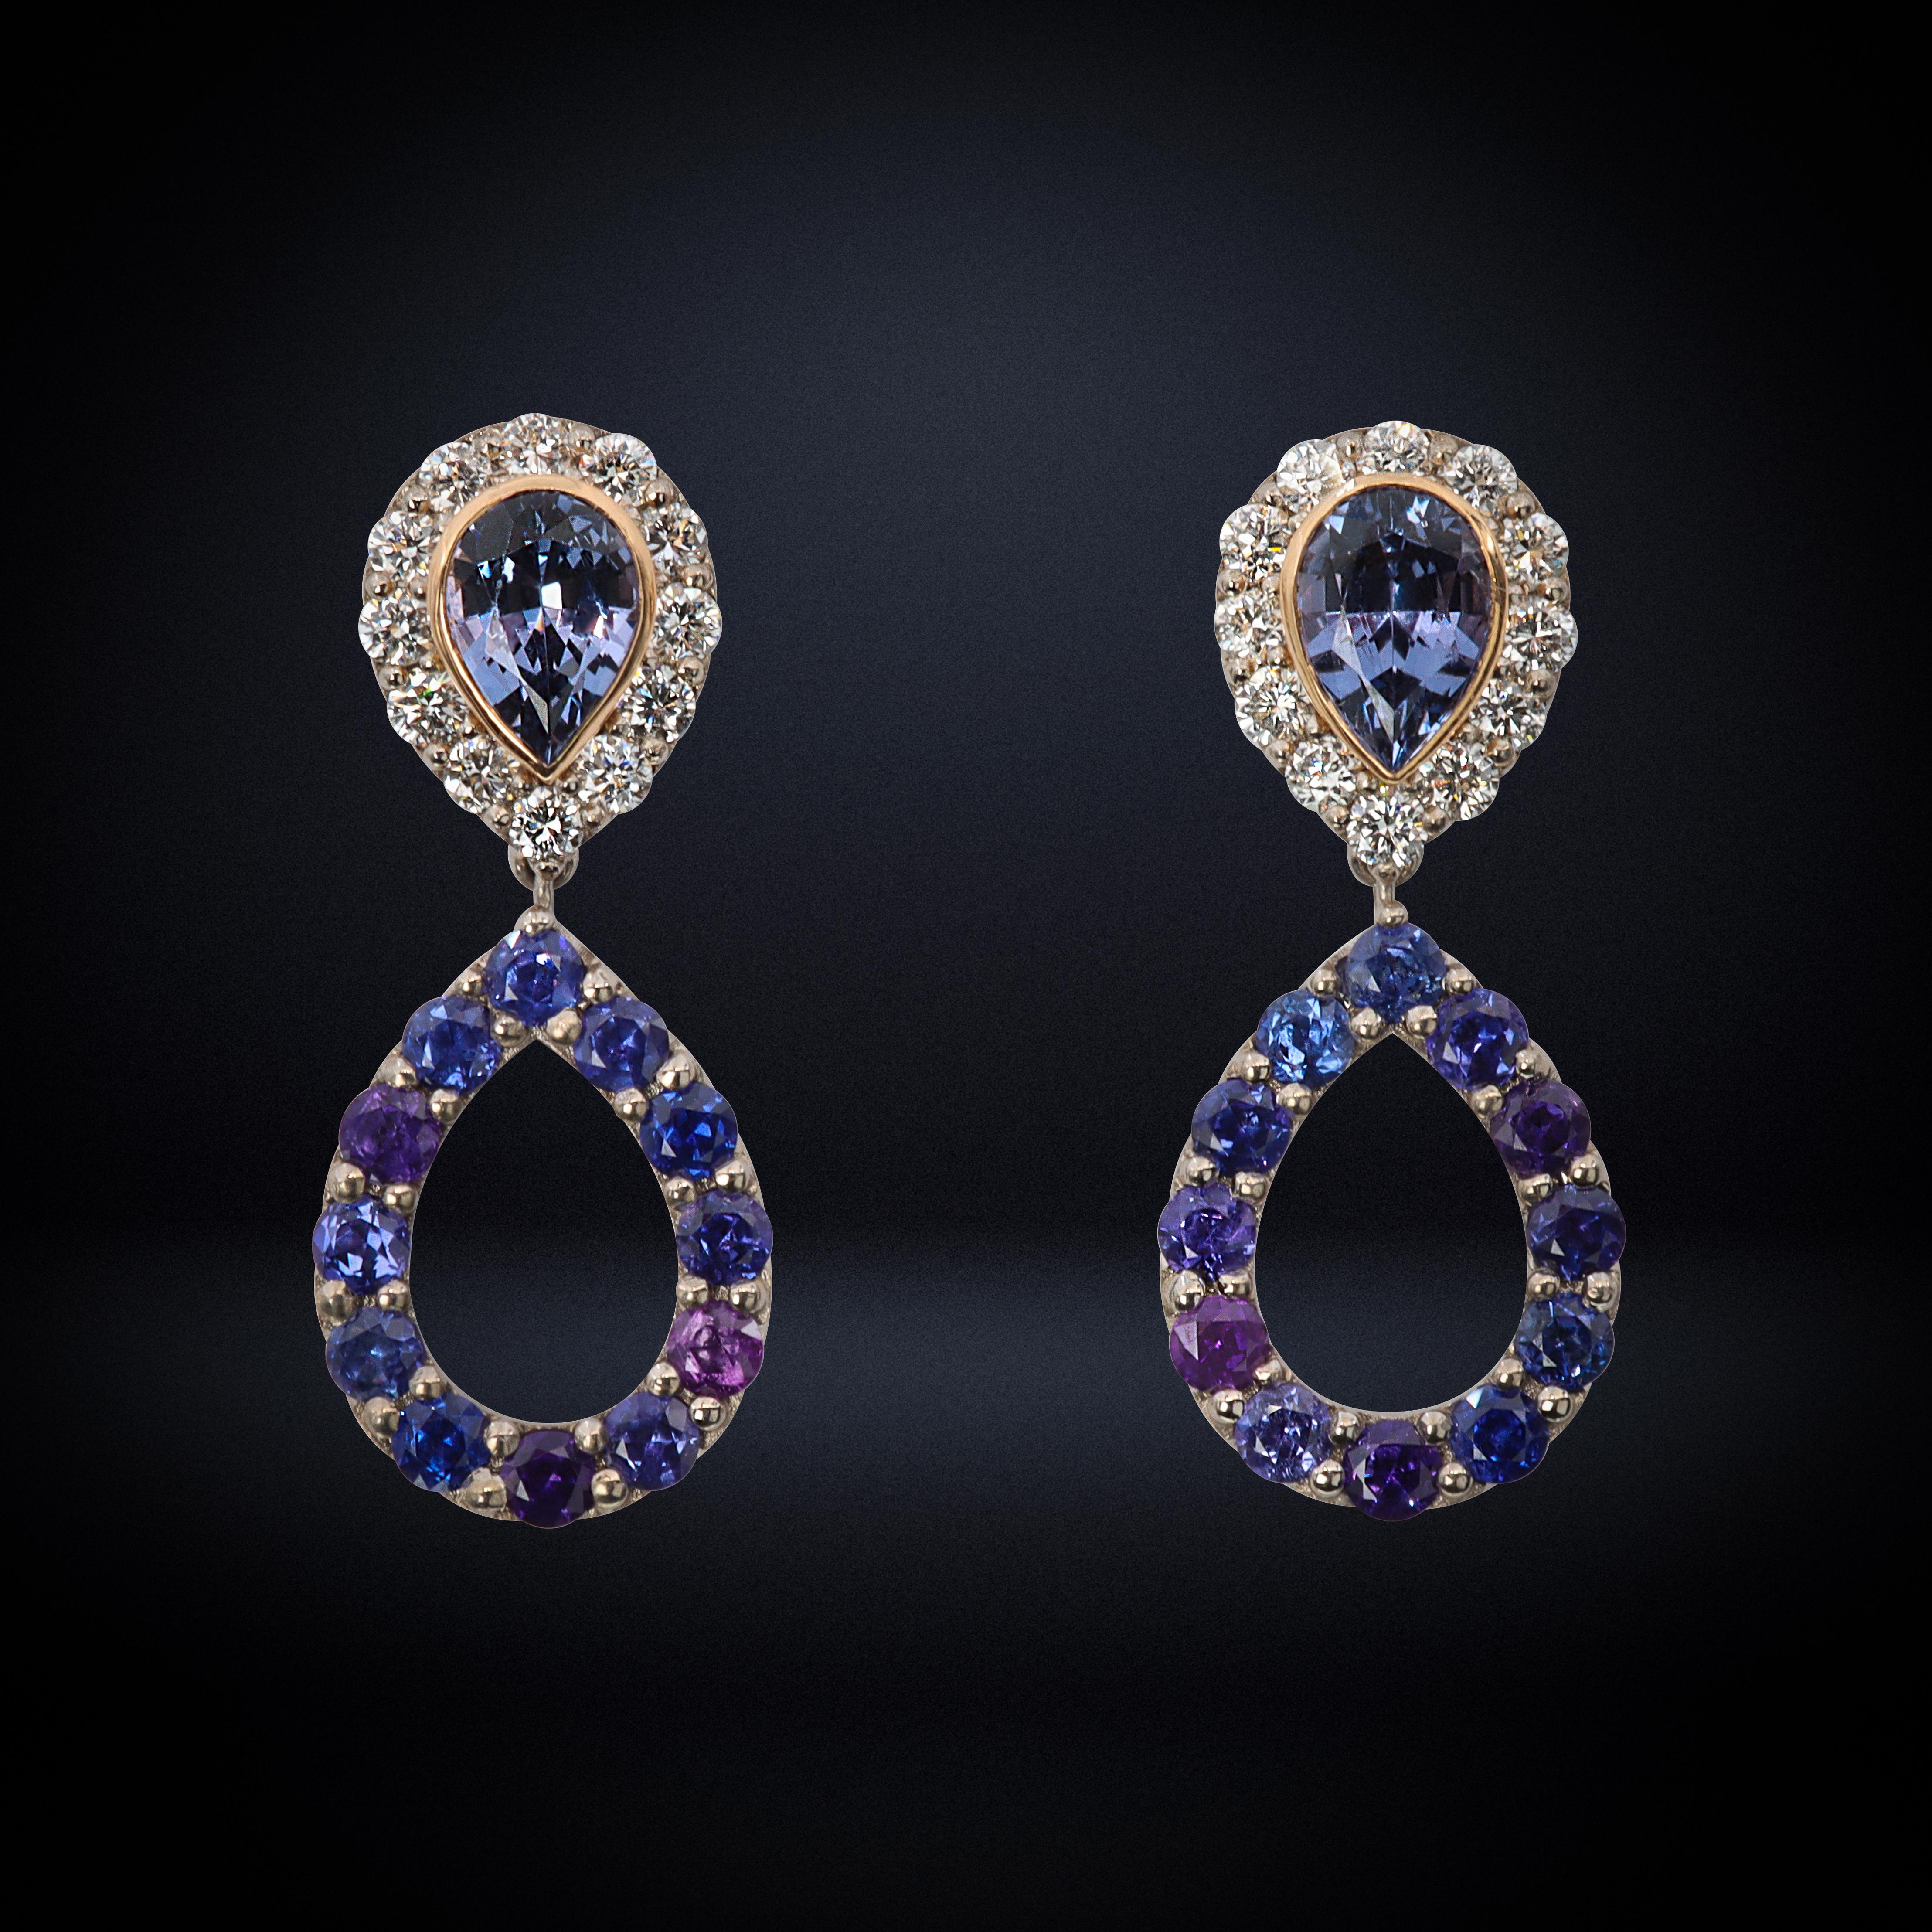 Mixed Cut Aventina-Spencer, Natural Colour Change Sapphire, Diamond and Spinel Earrings For Sale